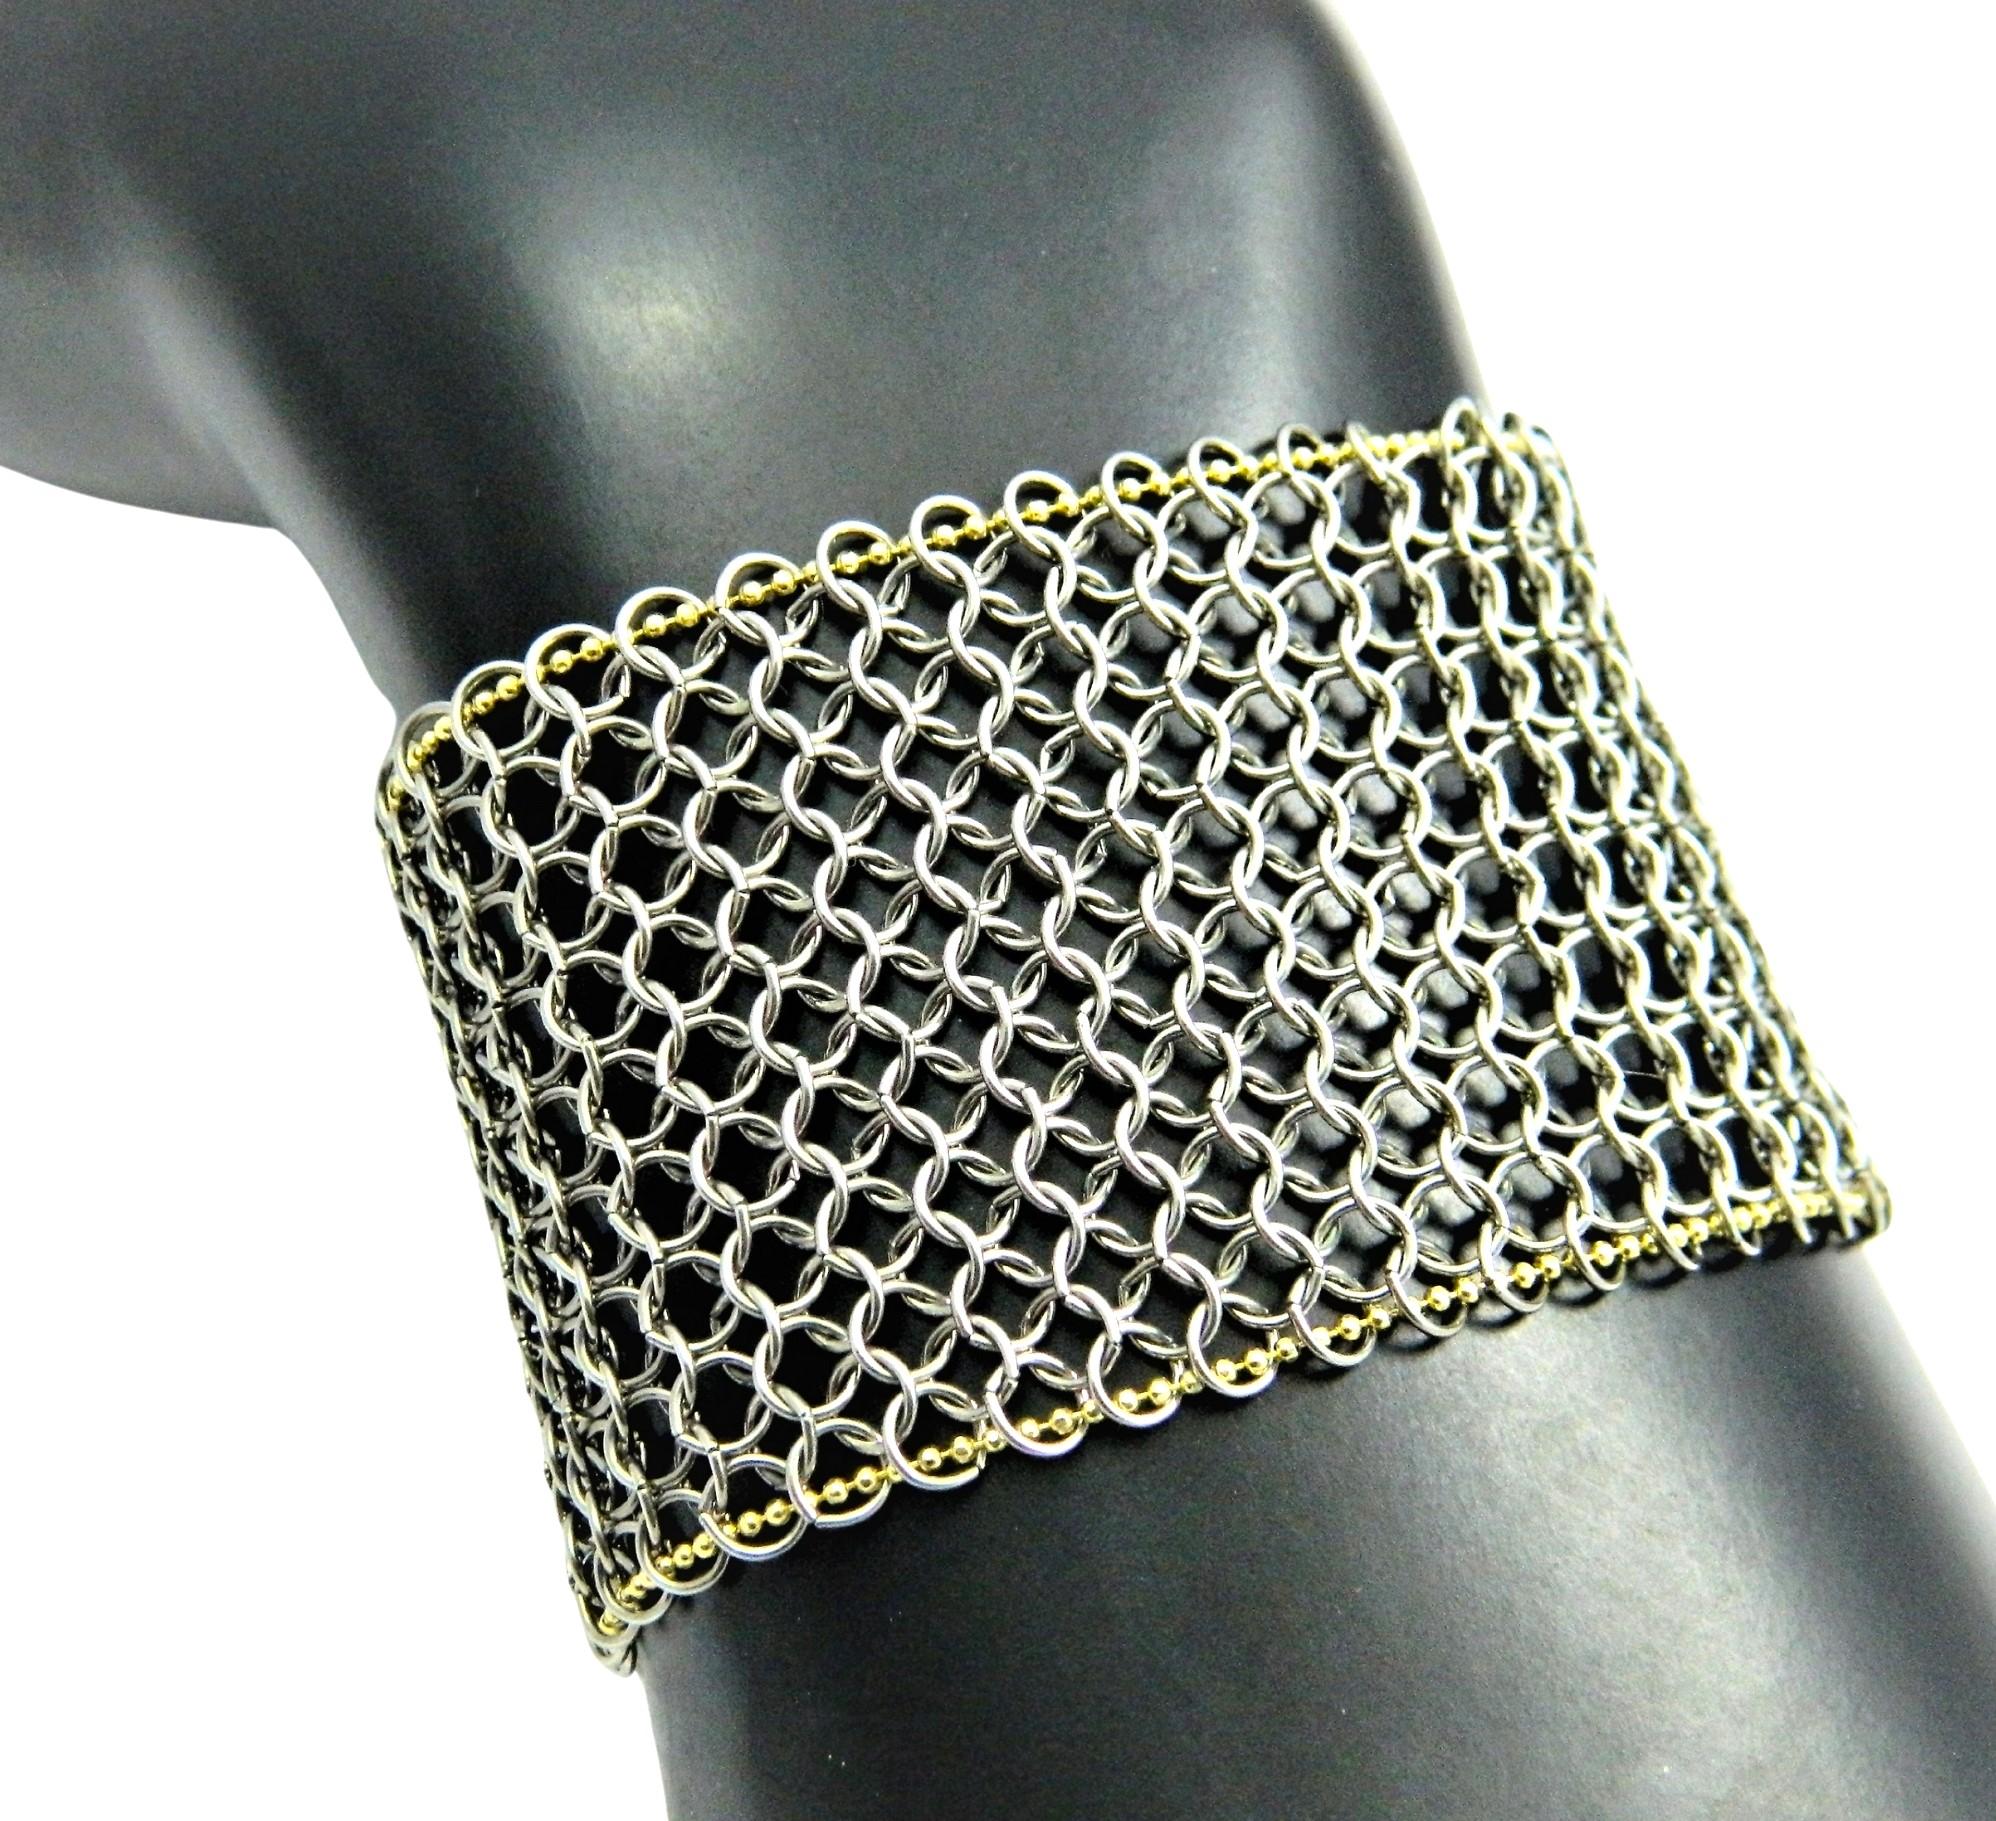 A one of a kind handmade Chainmail cuff Bracelet with 14K accents. The Stainless Steel Chainmail is machine made and cut into a strip. A 14K chain is woven into the chainmail at each border. The chain is diamond cut and really shows a sparkle